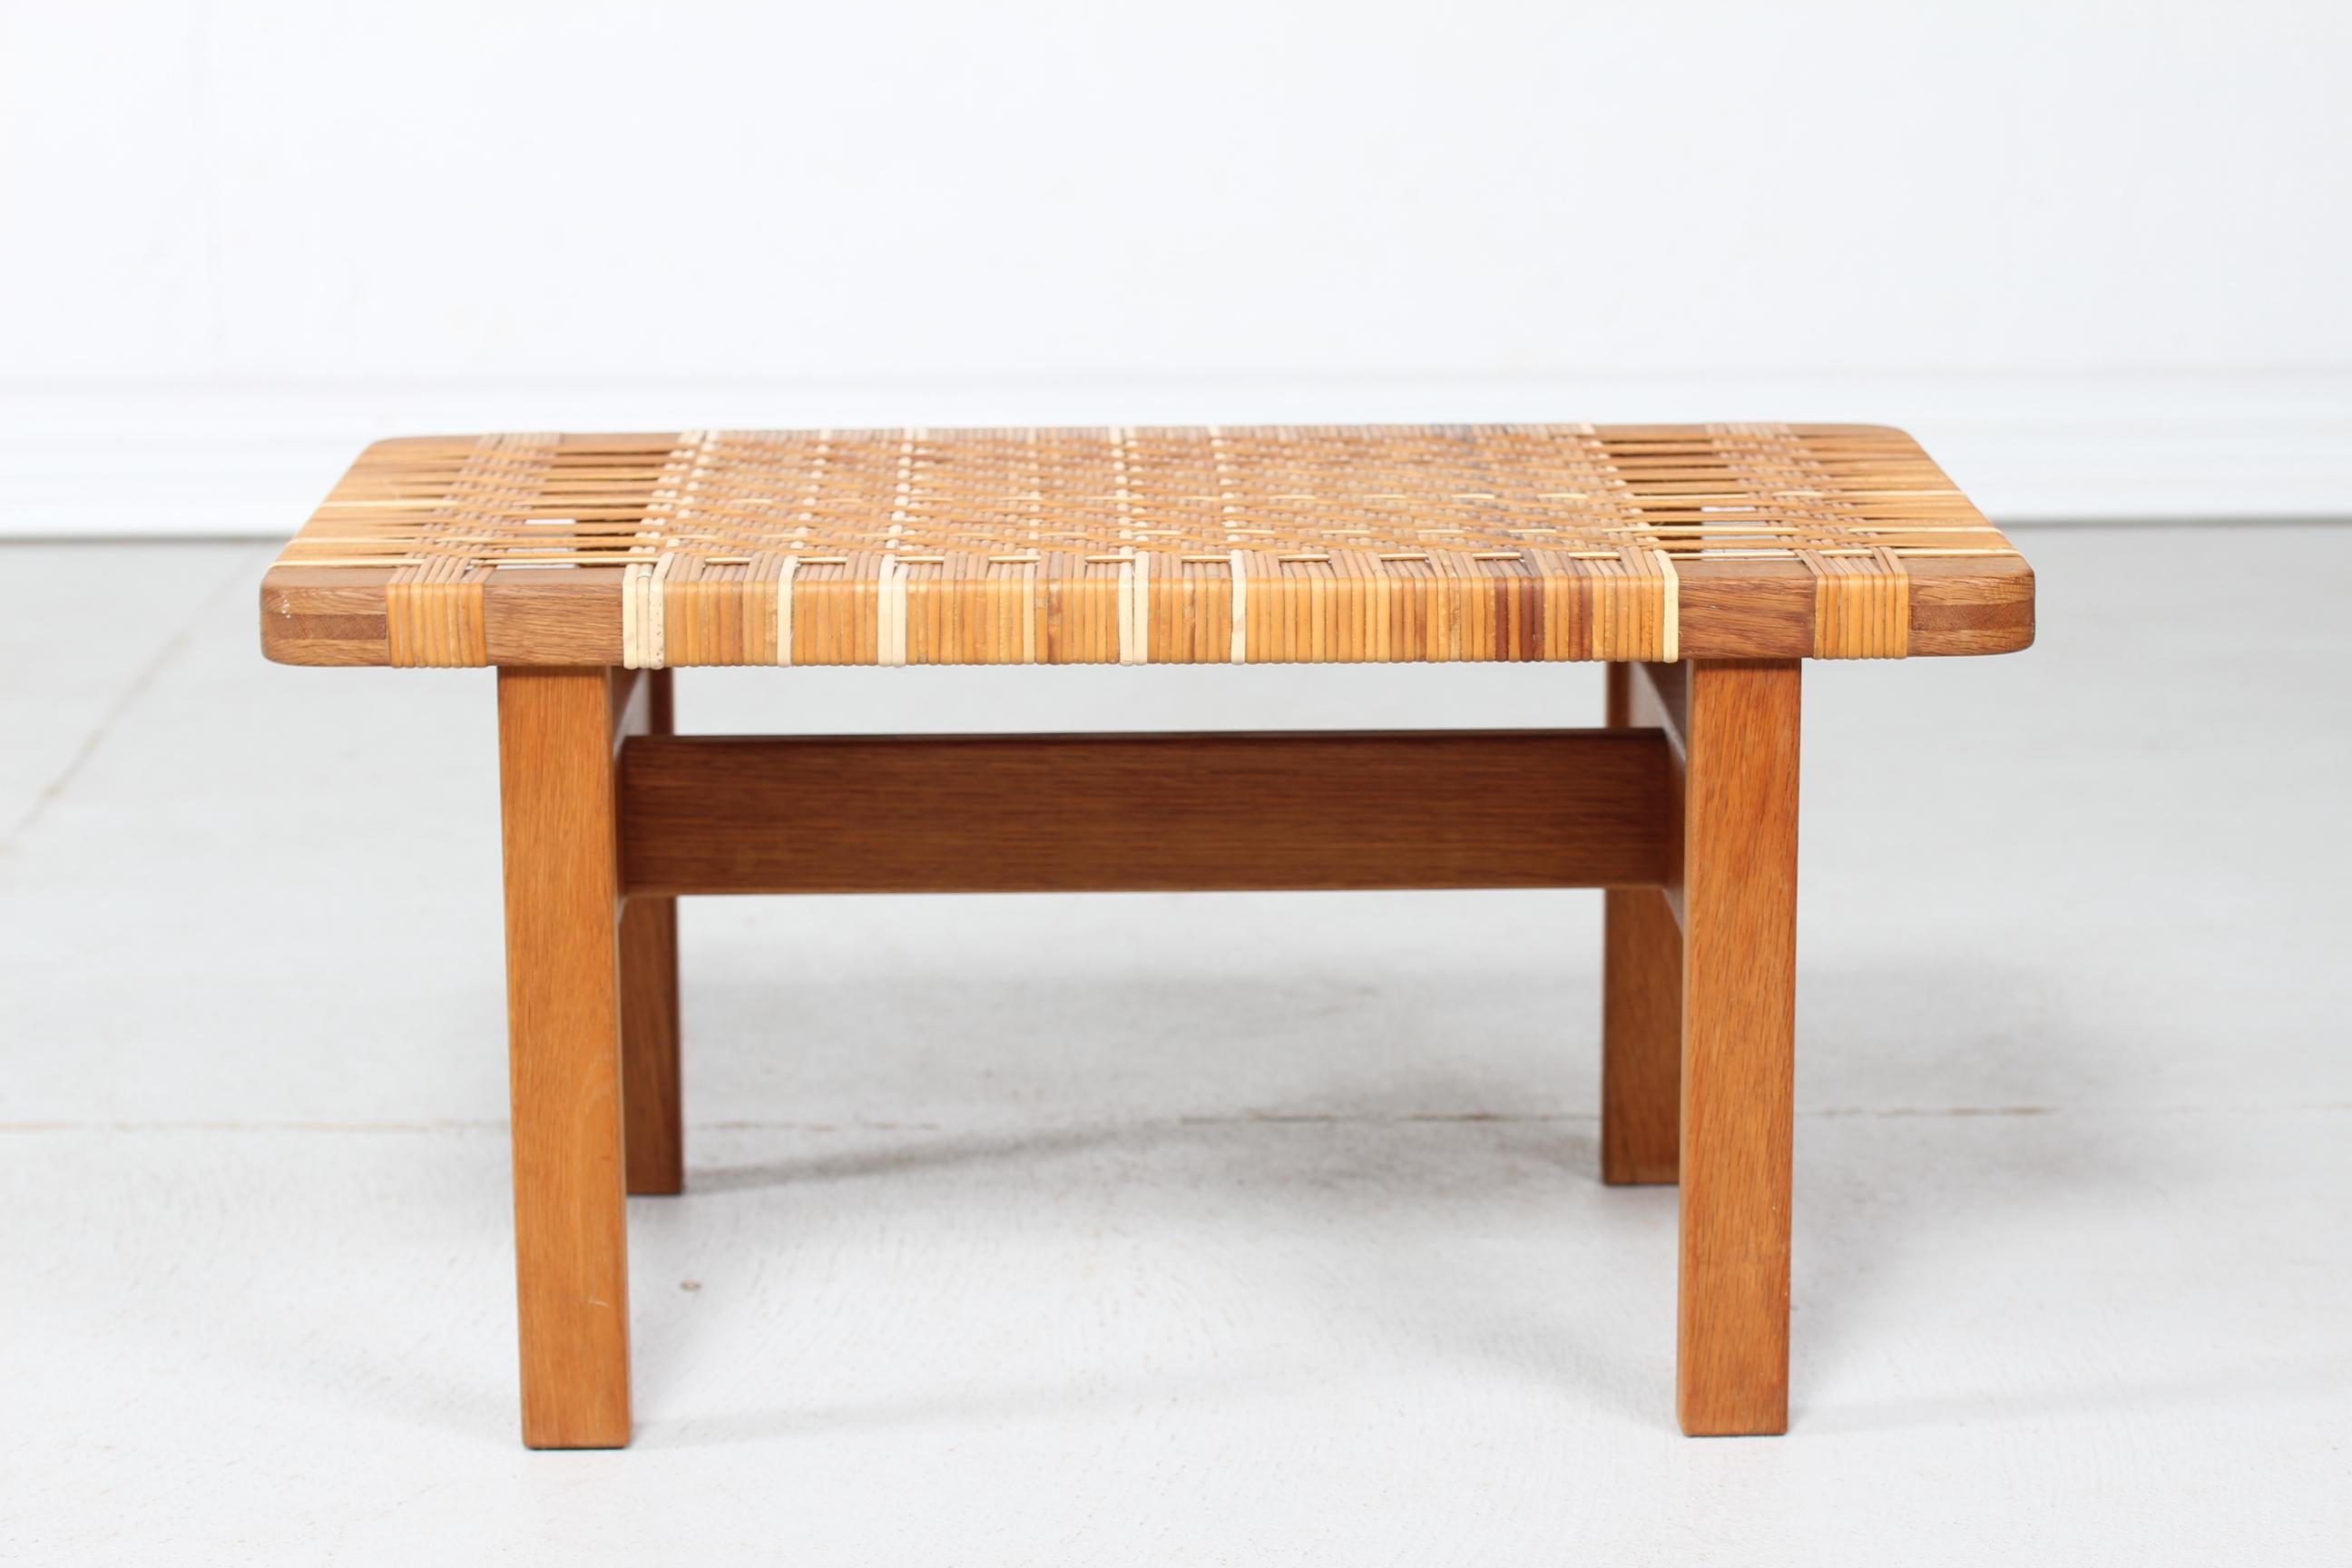 Low bench by Danish furniture designer Børge Mogensen (1914-1972) model BM 5273, manufactured by Fredericia Stolefabrik, Denmark.
The bench is made of solid oak with plaited cane.

Very nice vintage condition with beautiful patina. 
The plaiting